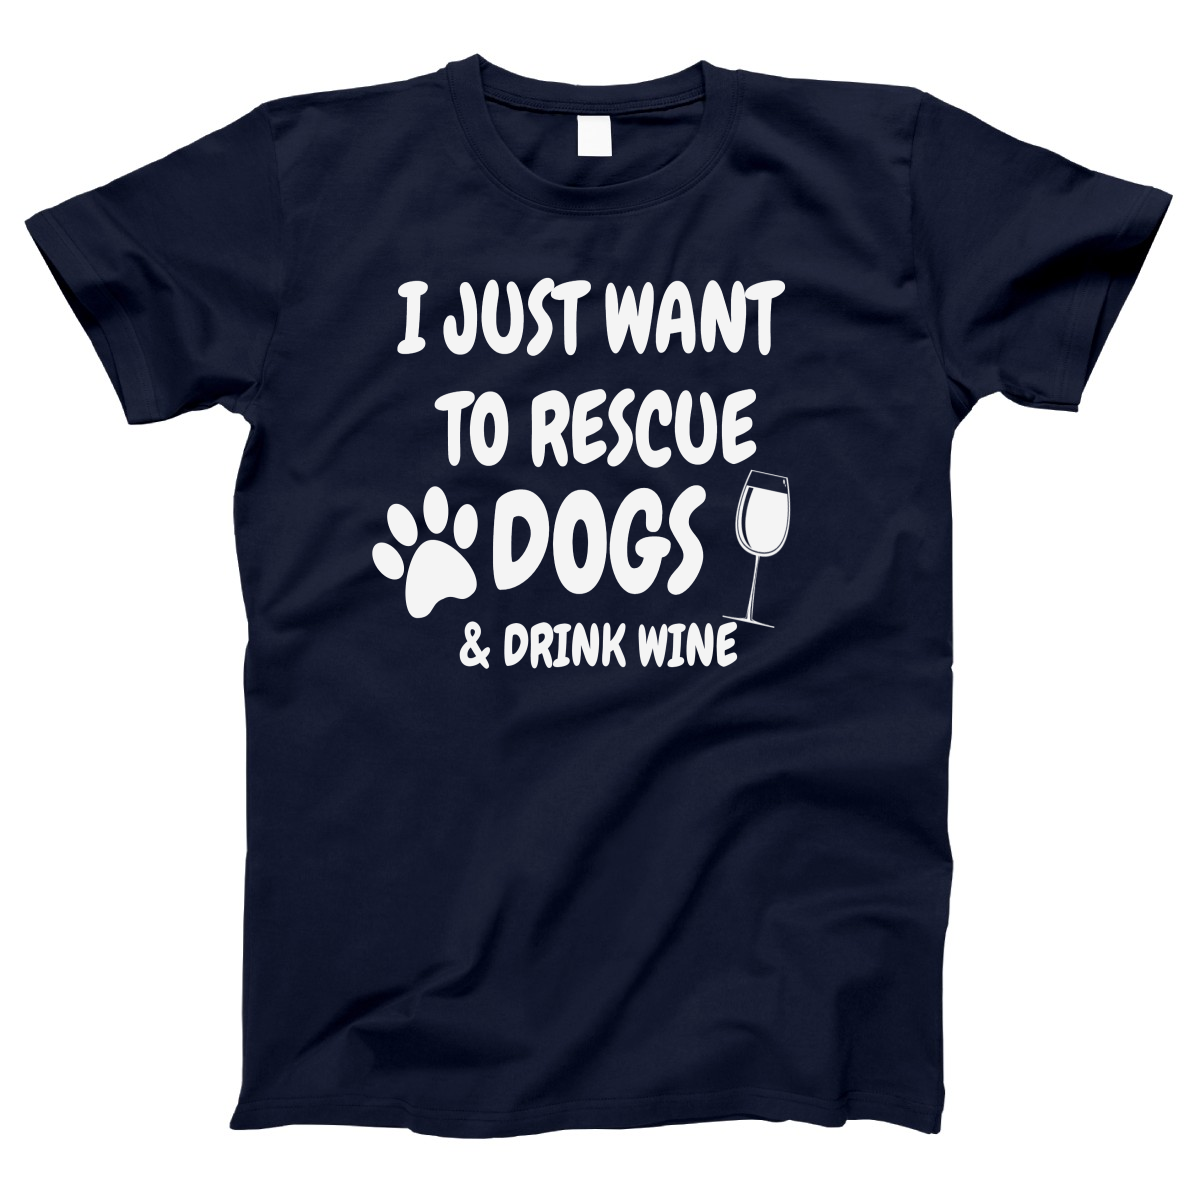 Dogs and Drink Wine Women's T-shirt | Navy